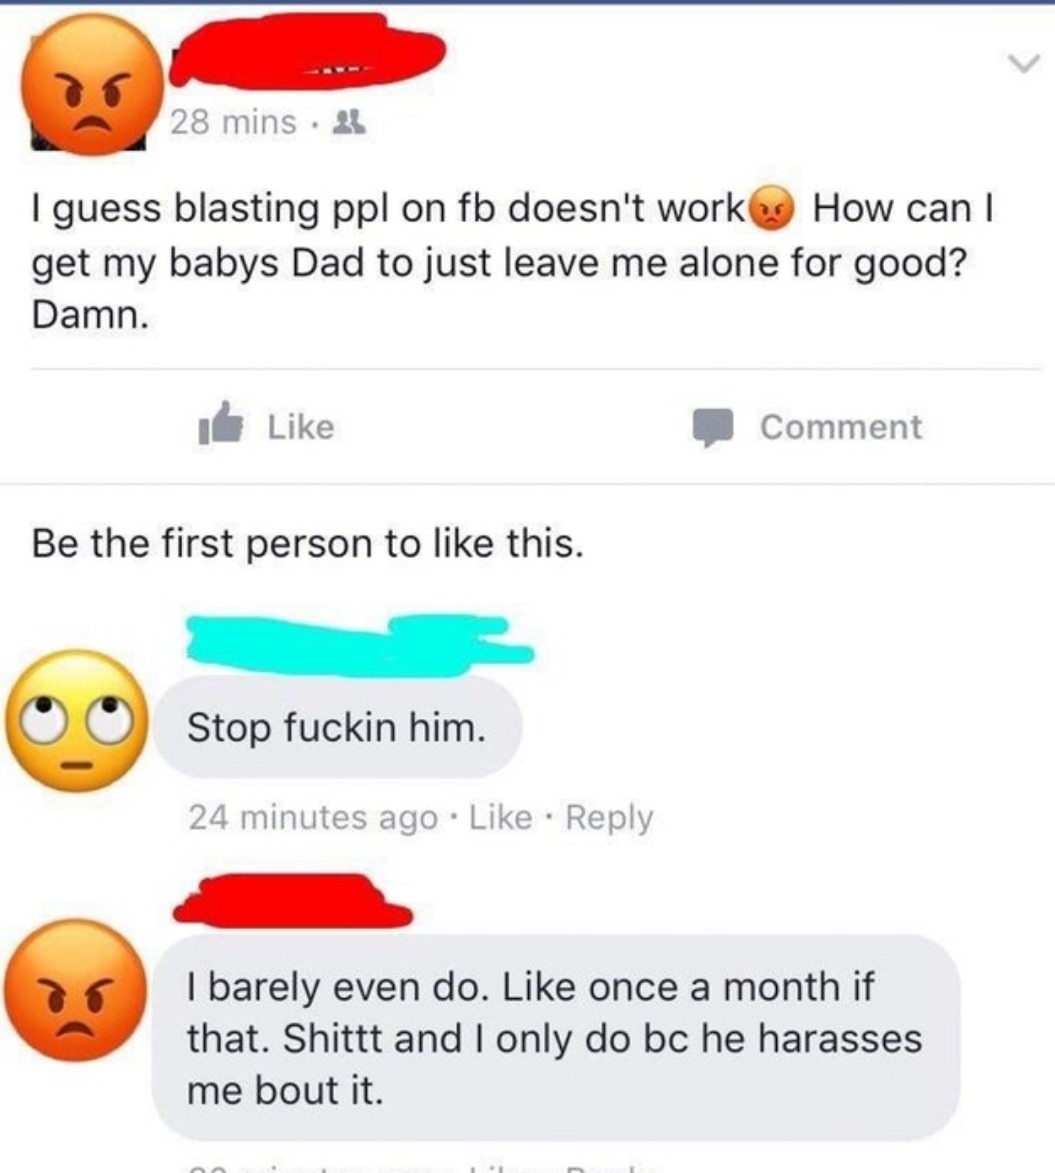 cringe emoticon - 28 mins. 23 I guess blasting ppl on fb doesn't work How can I get my babys Dad to just leave me alone for good? Damn. Comment Be the first person to this. Stop fuckin him. 24 minutes ago I barely even do. once a month if that. Shittt and